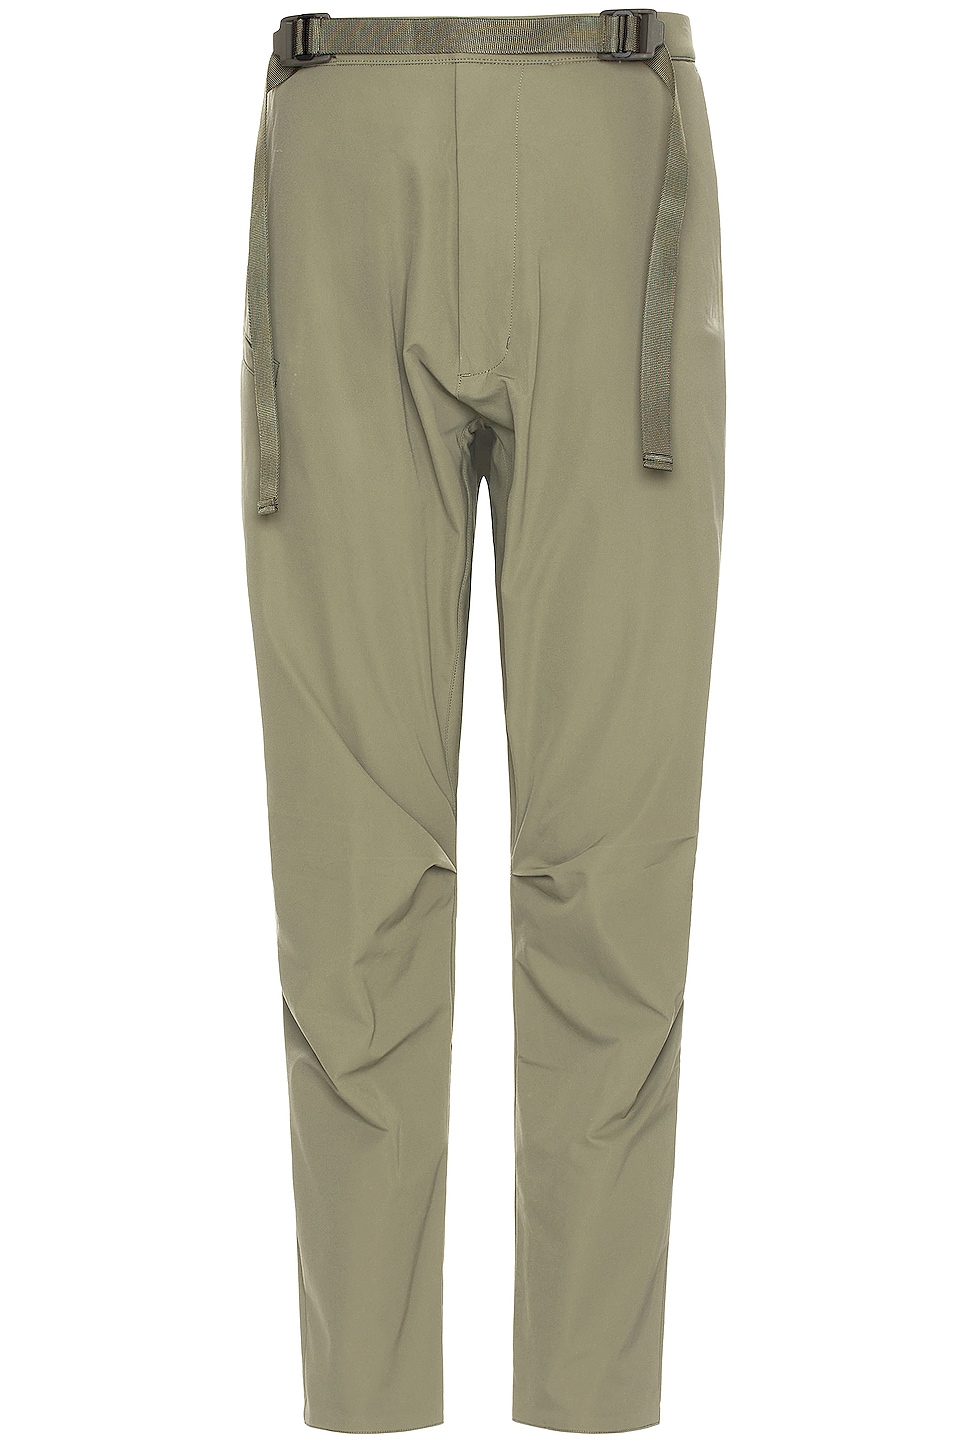 Image 1 of Acronym P15-ds Schoeller Dryskin Drawcord Trouser in Alpha Green